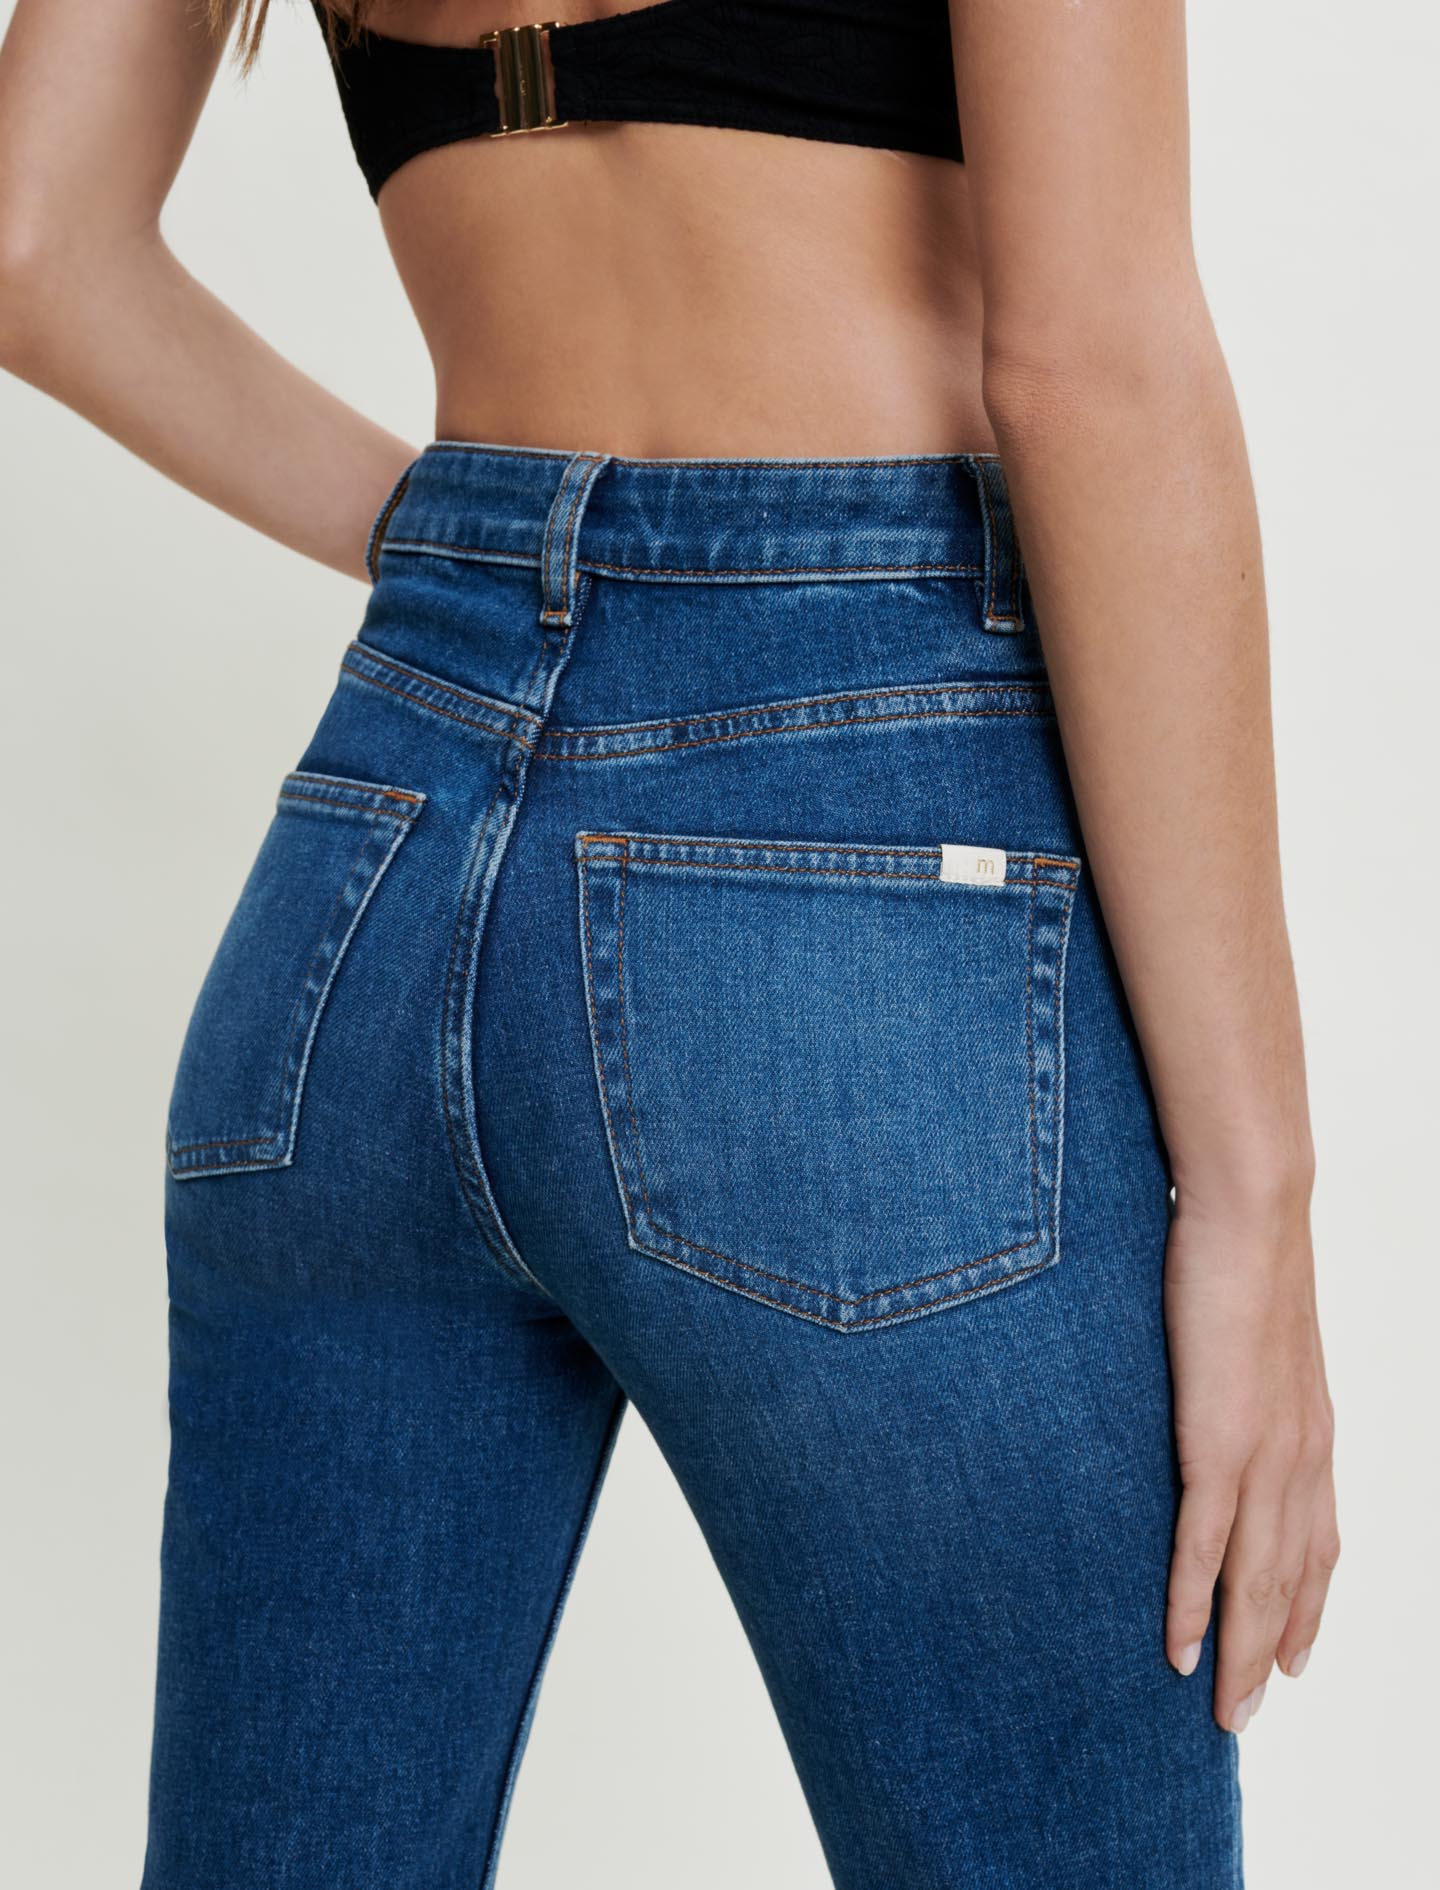 Jeans with pockets - Blue